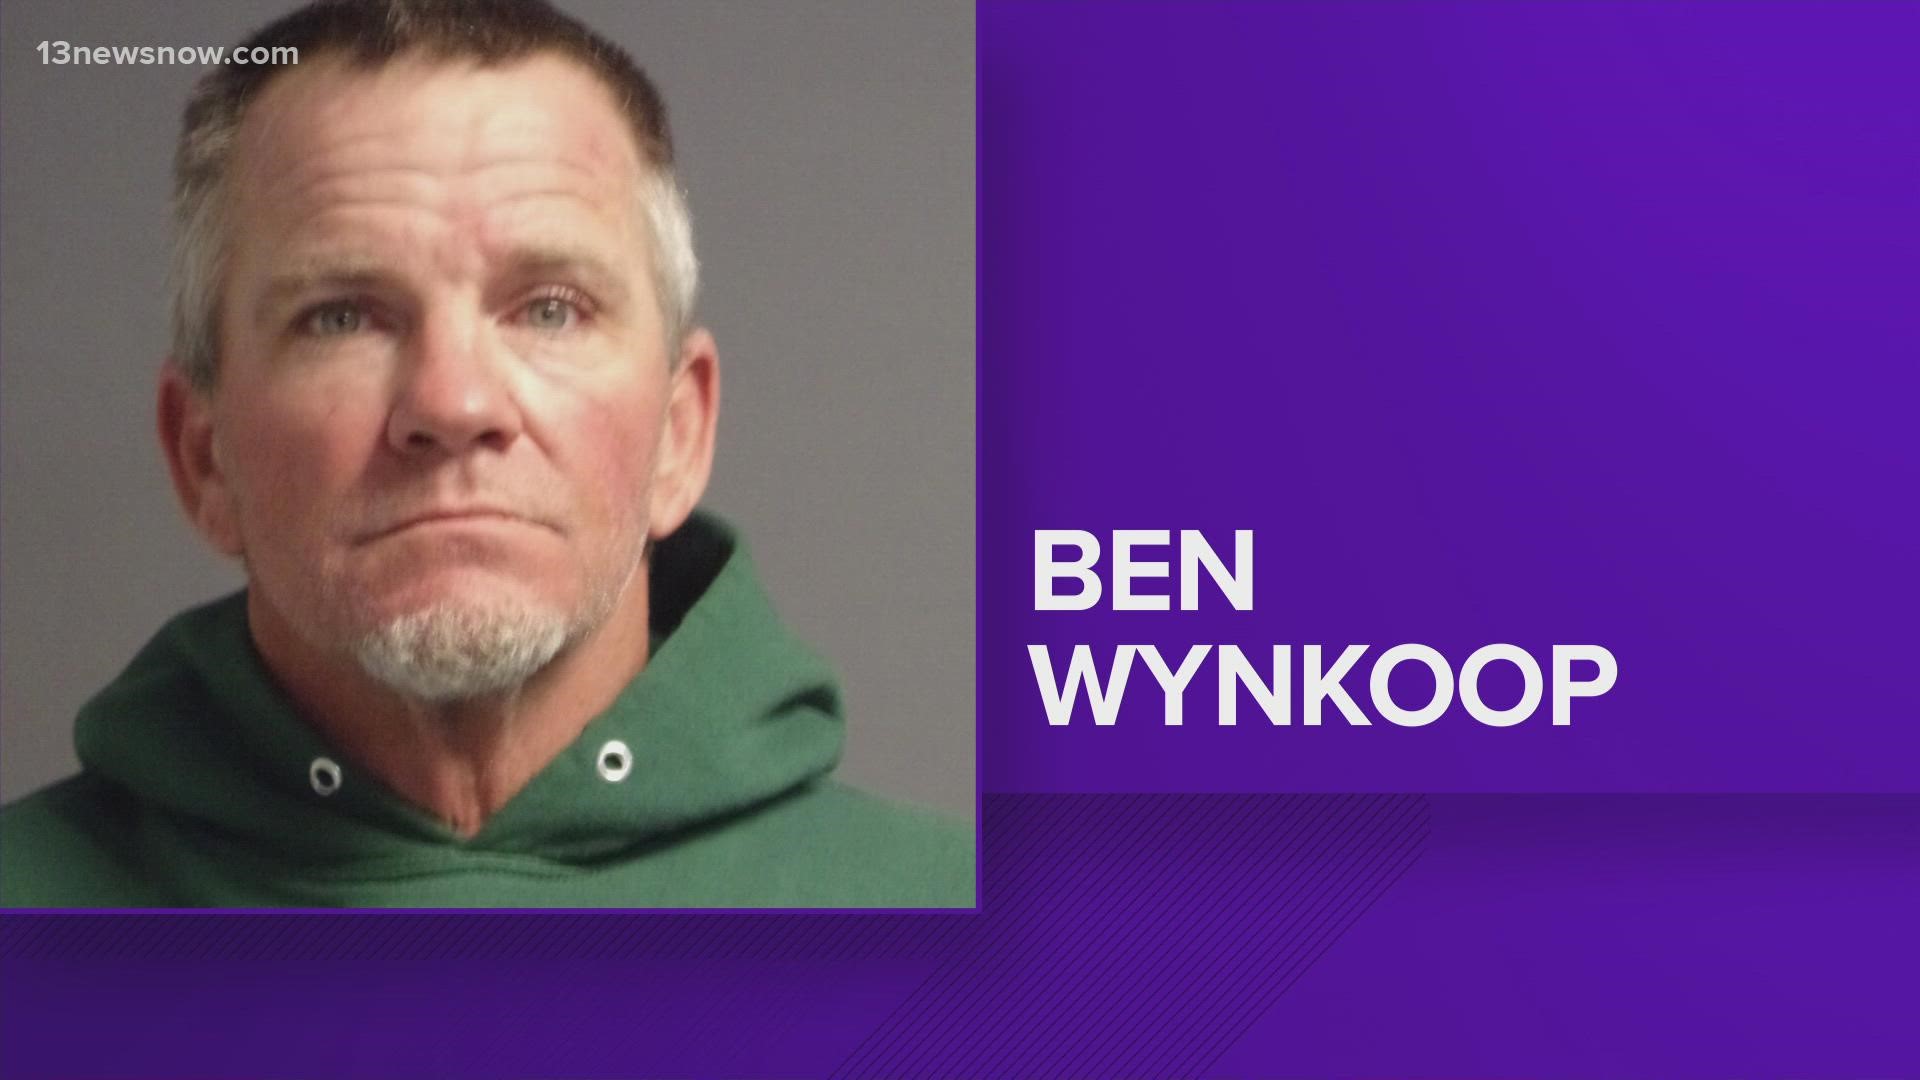 Ben Wynkoop is facing a first-degree murder charge after police say he shot and killed Kathyrn Dean.